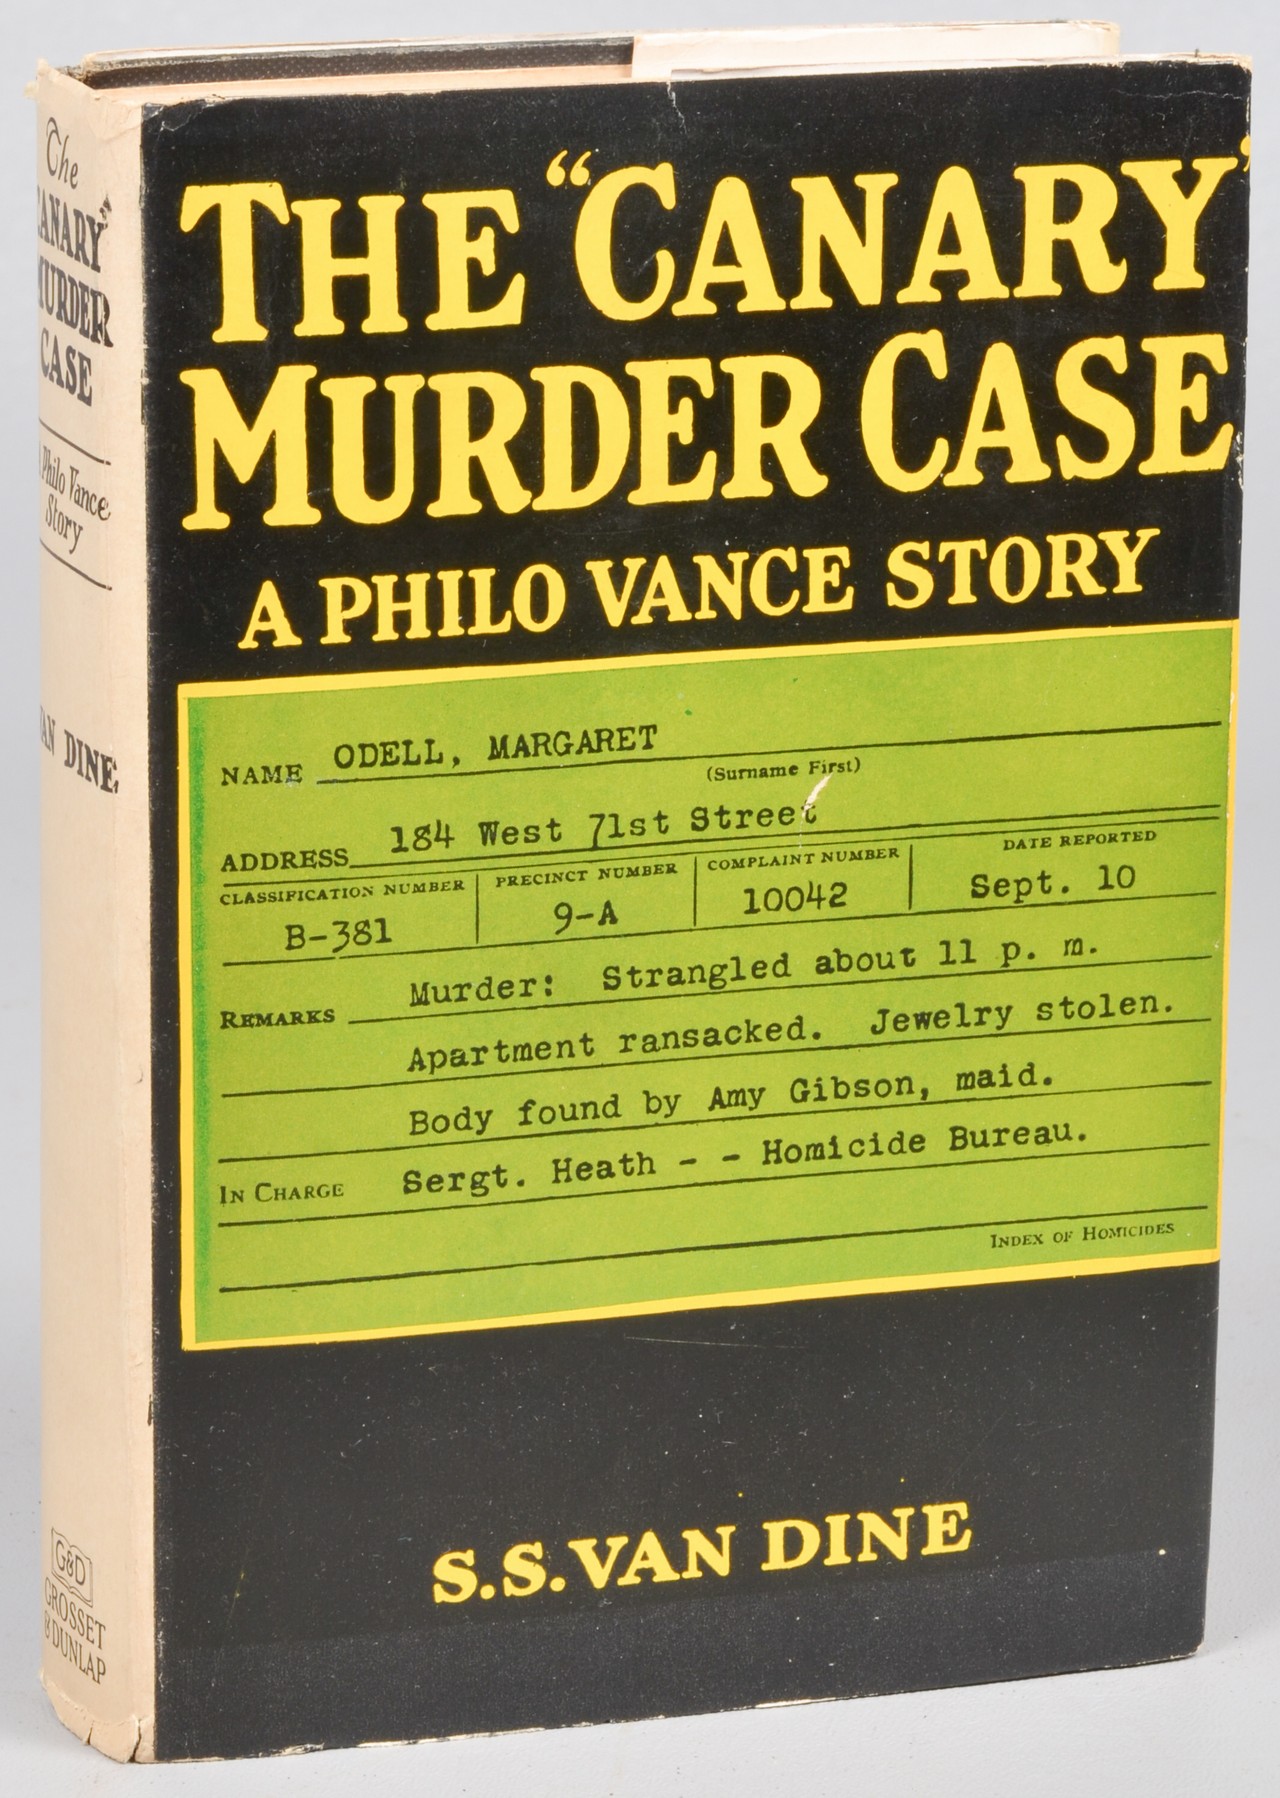 The "Canary" Murder Case, 1929,